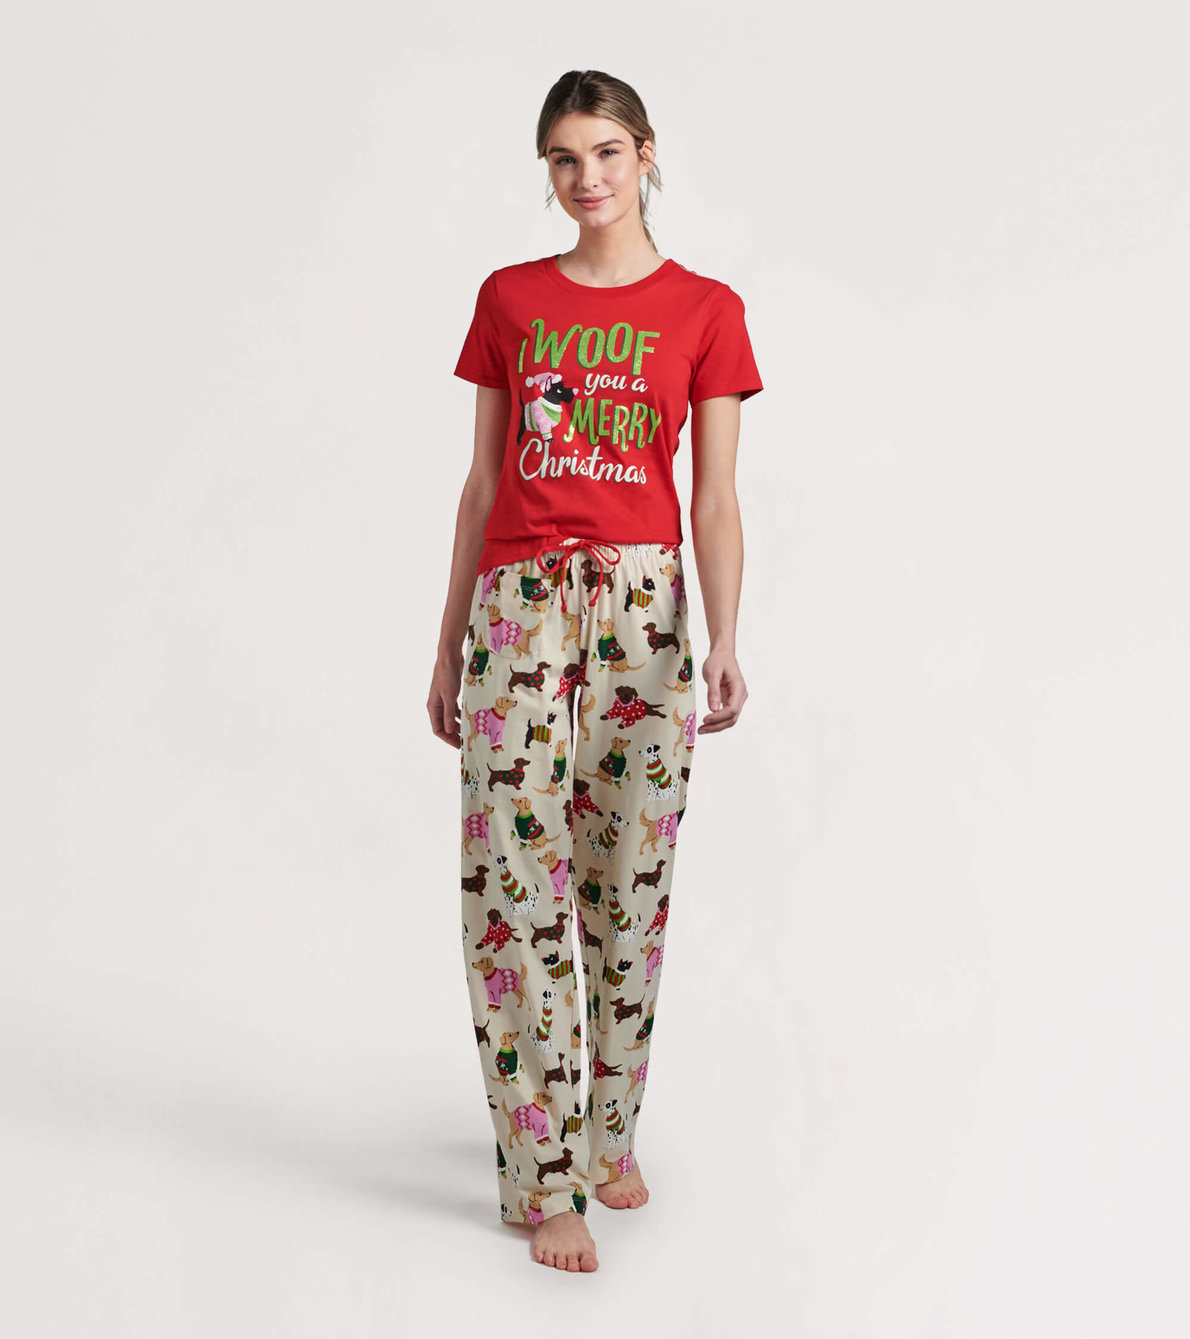 View larger image of Woofing Christmas Women's Pajama Tee